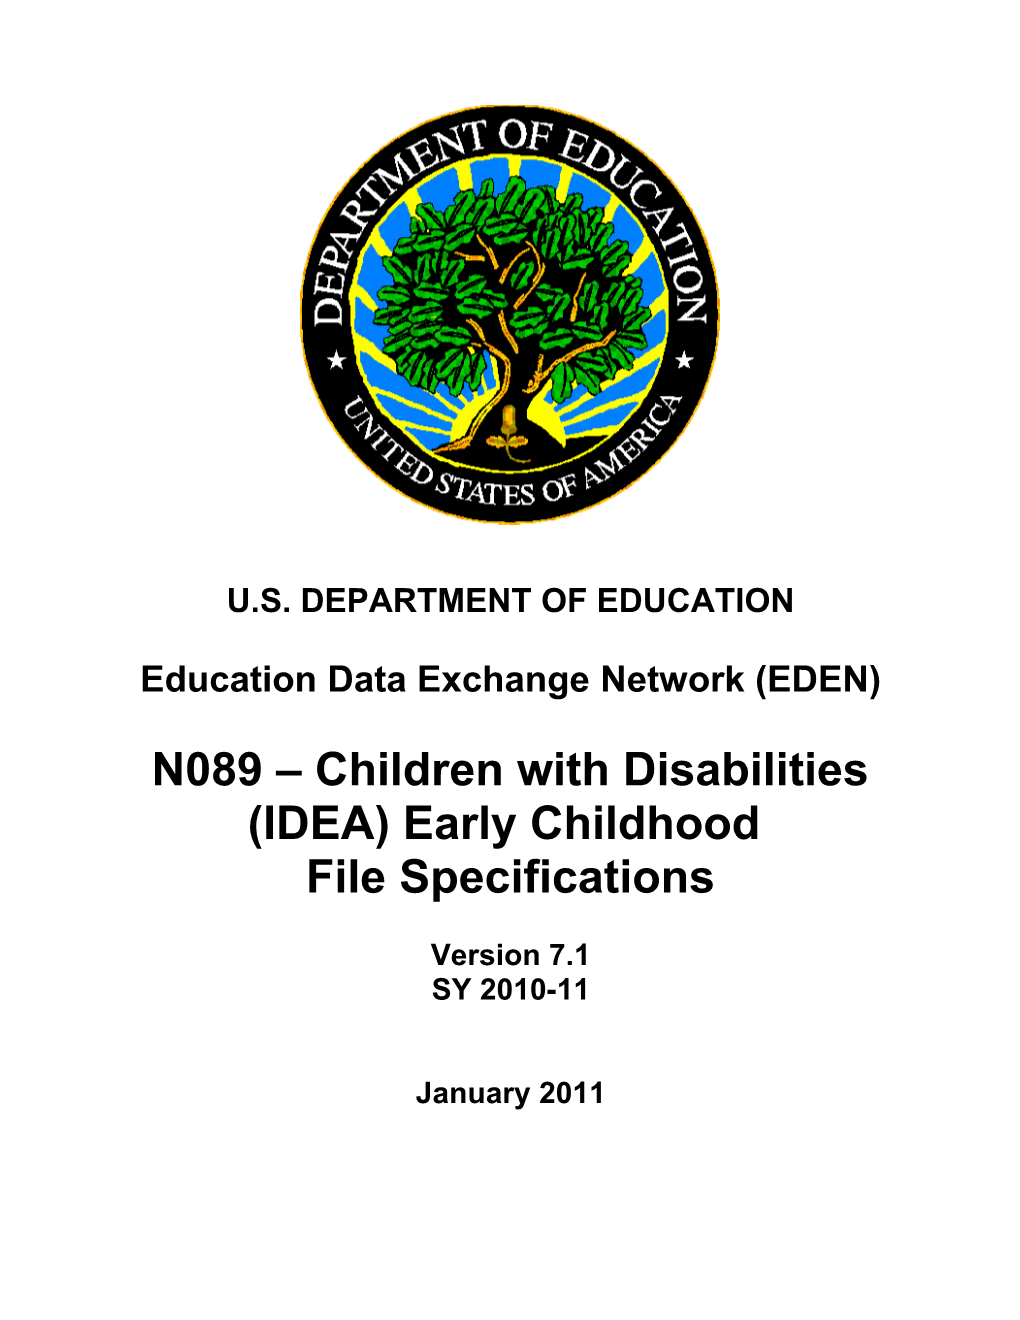 N089- Children with Disabilities (IDEA) Early Childhood File Specifications (MS Word)